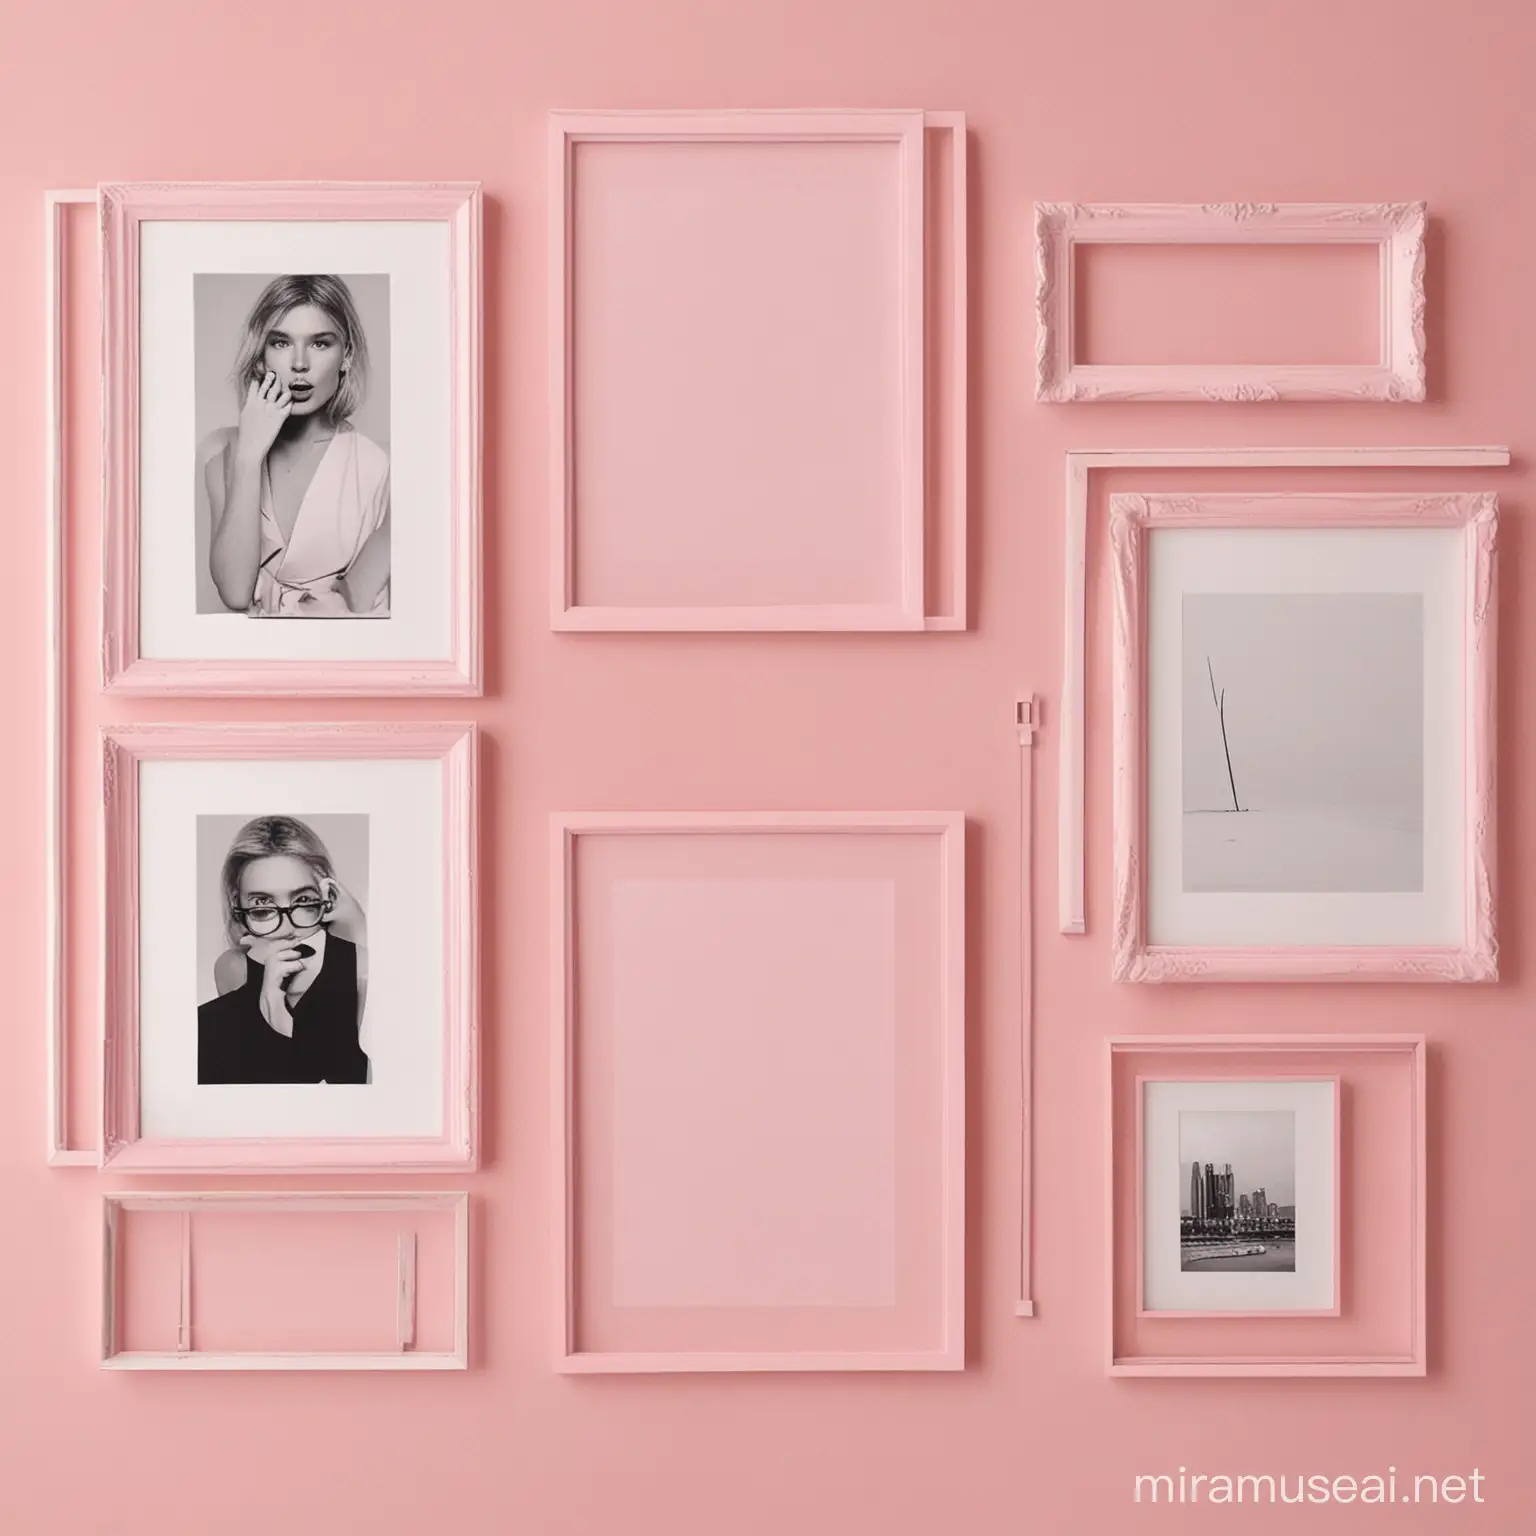  8 wall frames in which 6 are a4 size and the rest are 1000x1000 pixels, pink aesthetic
